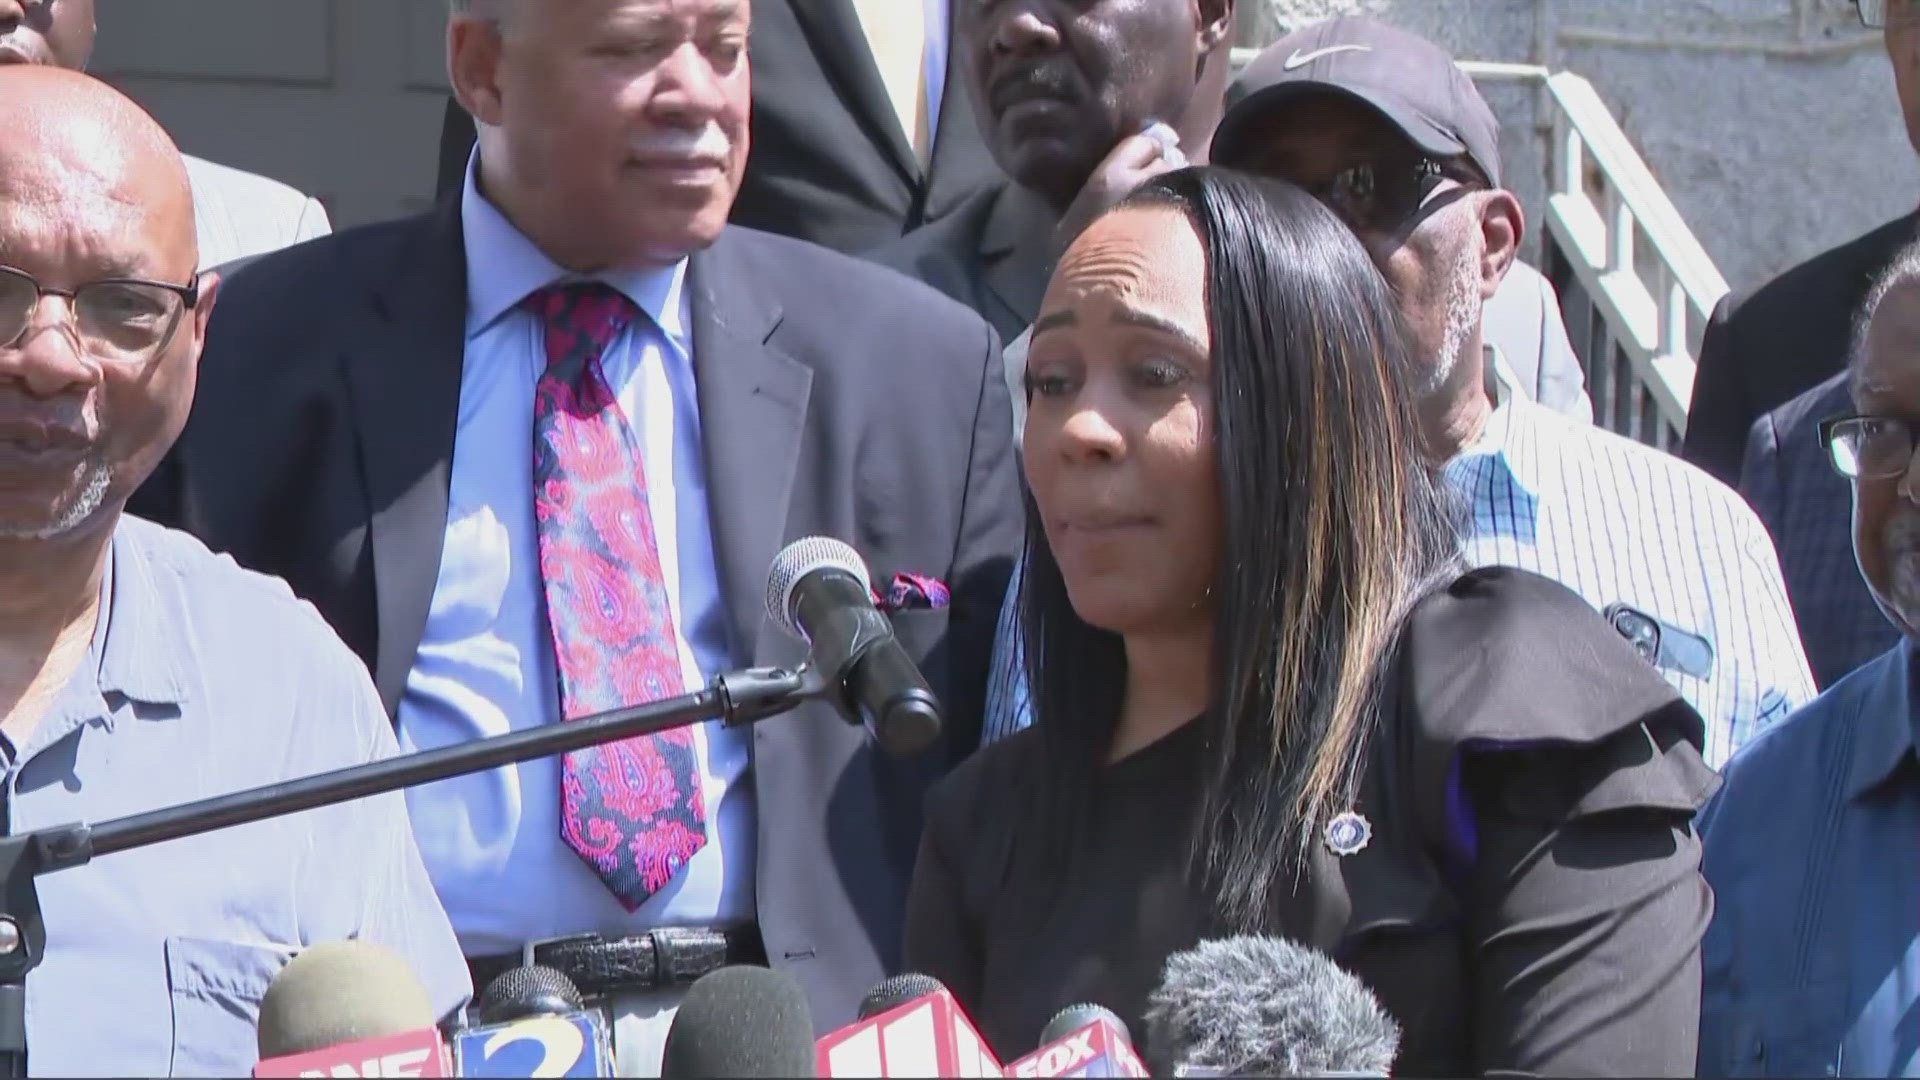 A news conference was held Monday morning at Big Bethel AME Church on Auburn Avenue.